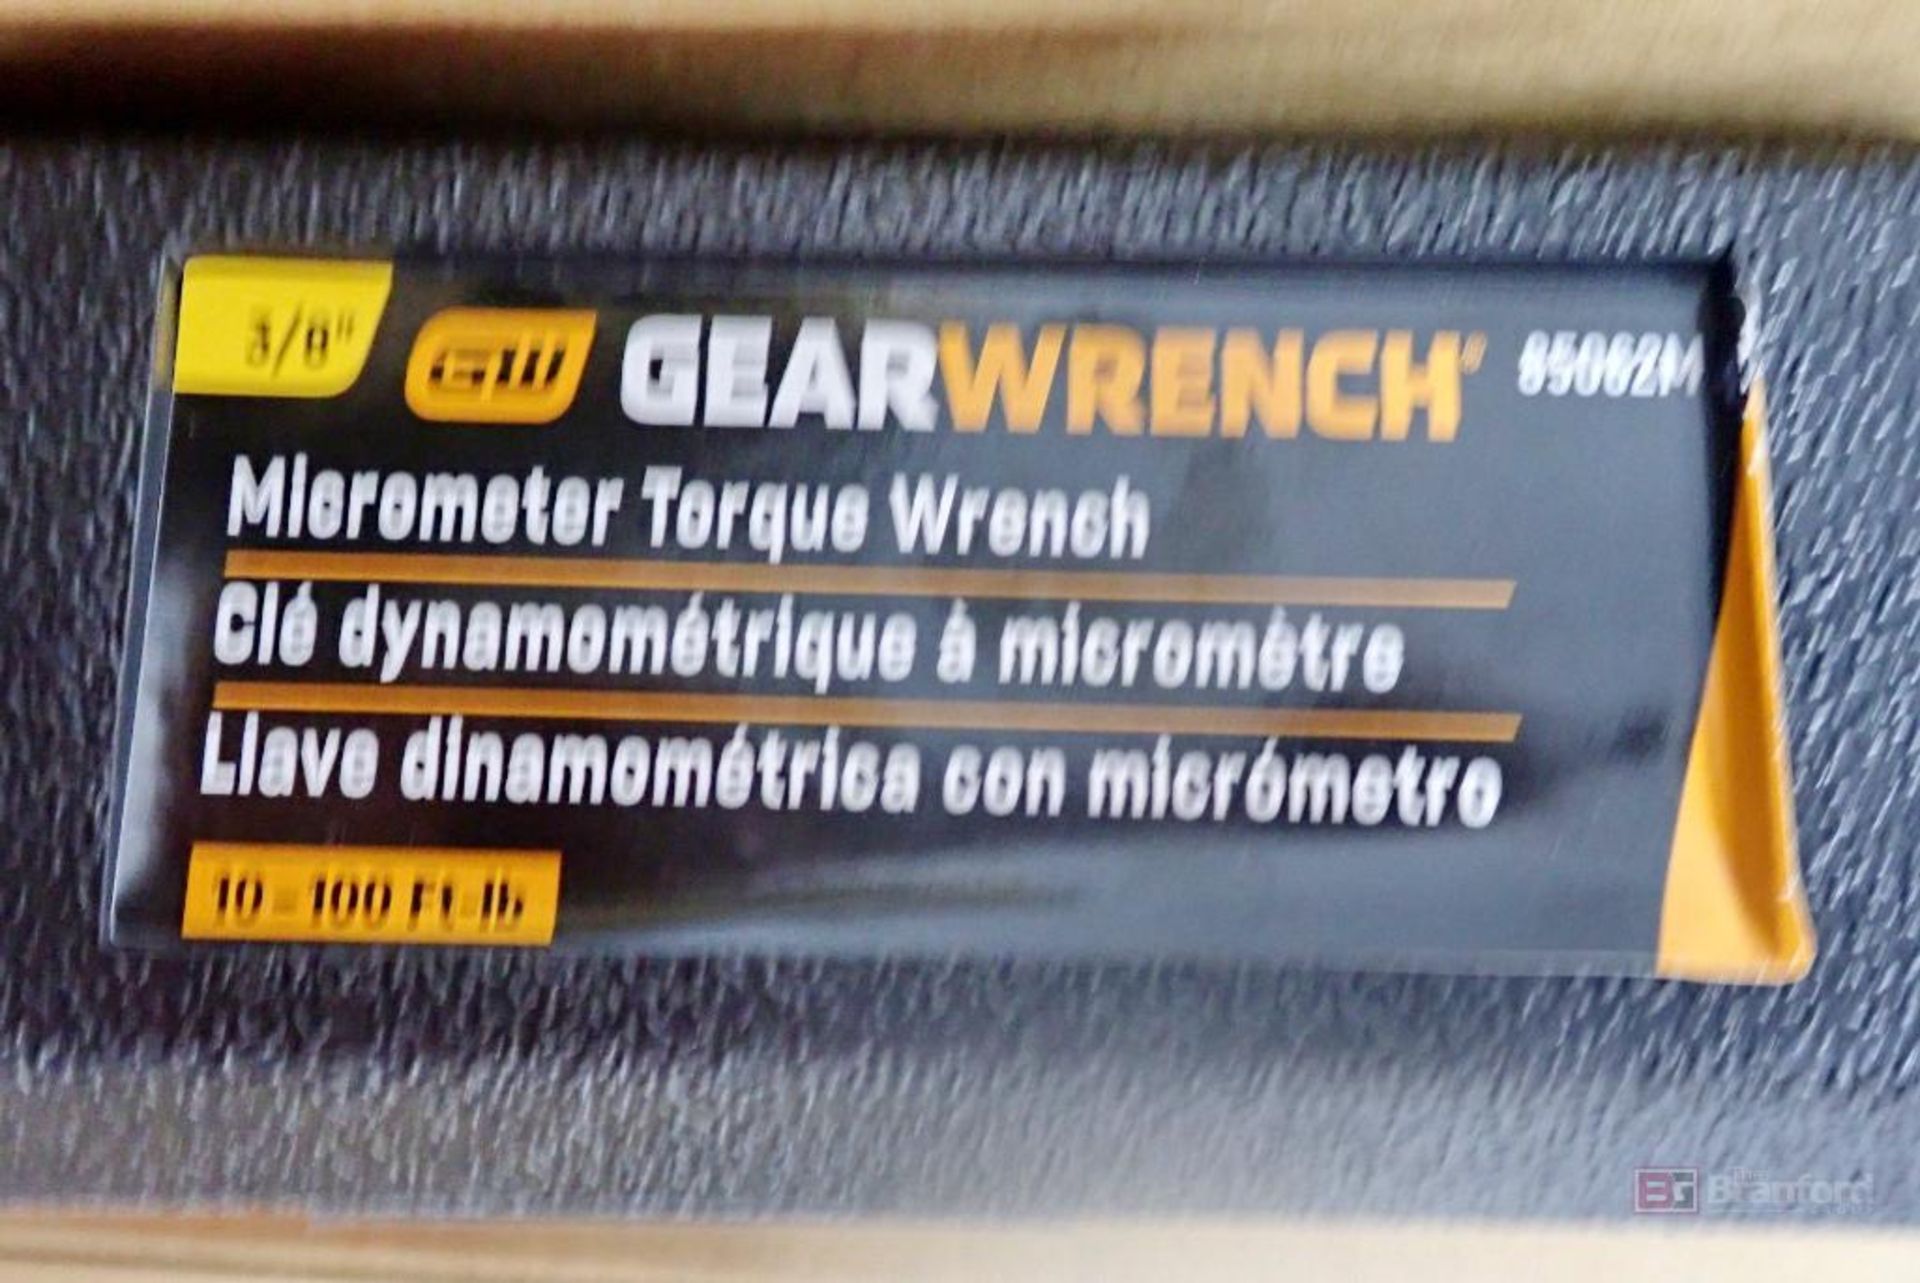 GearWrench 85062M (8612114) 3/8" Drive Micrometer Torque Wrench - Image 2 of 3